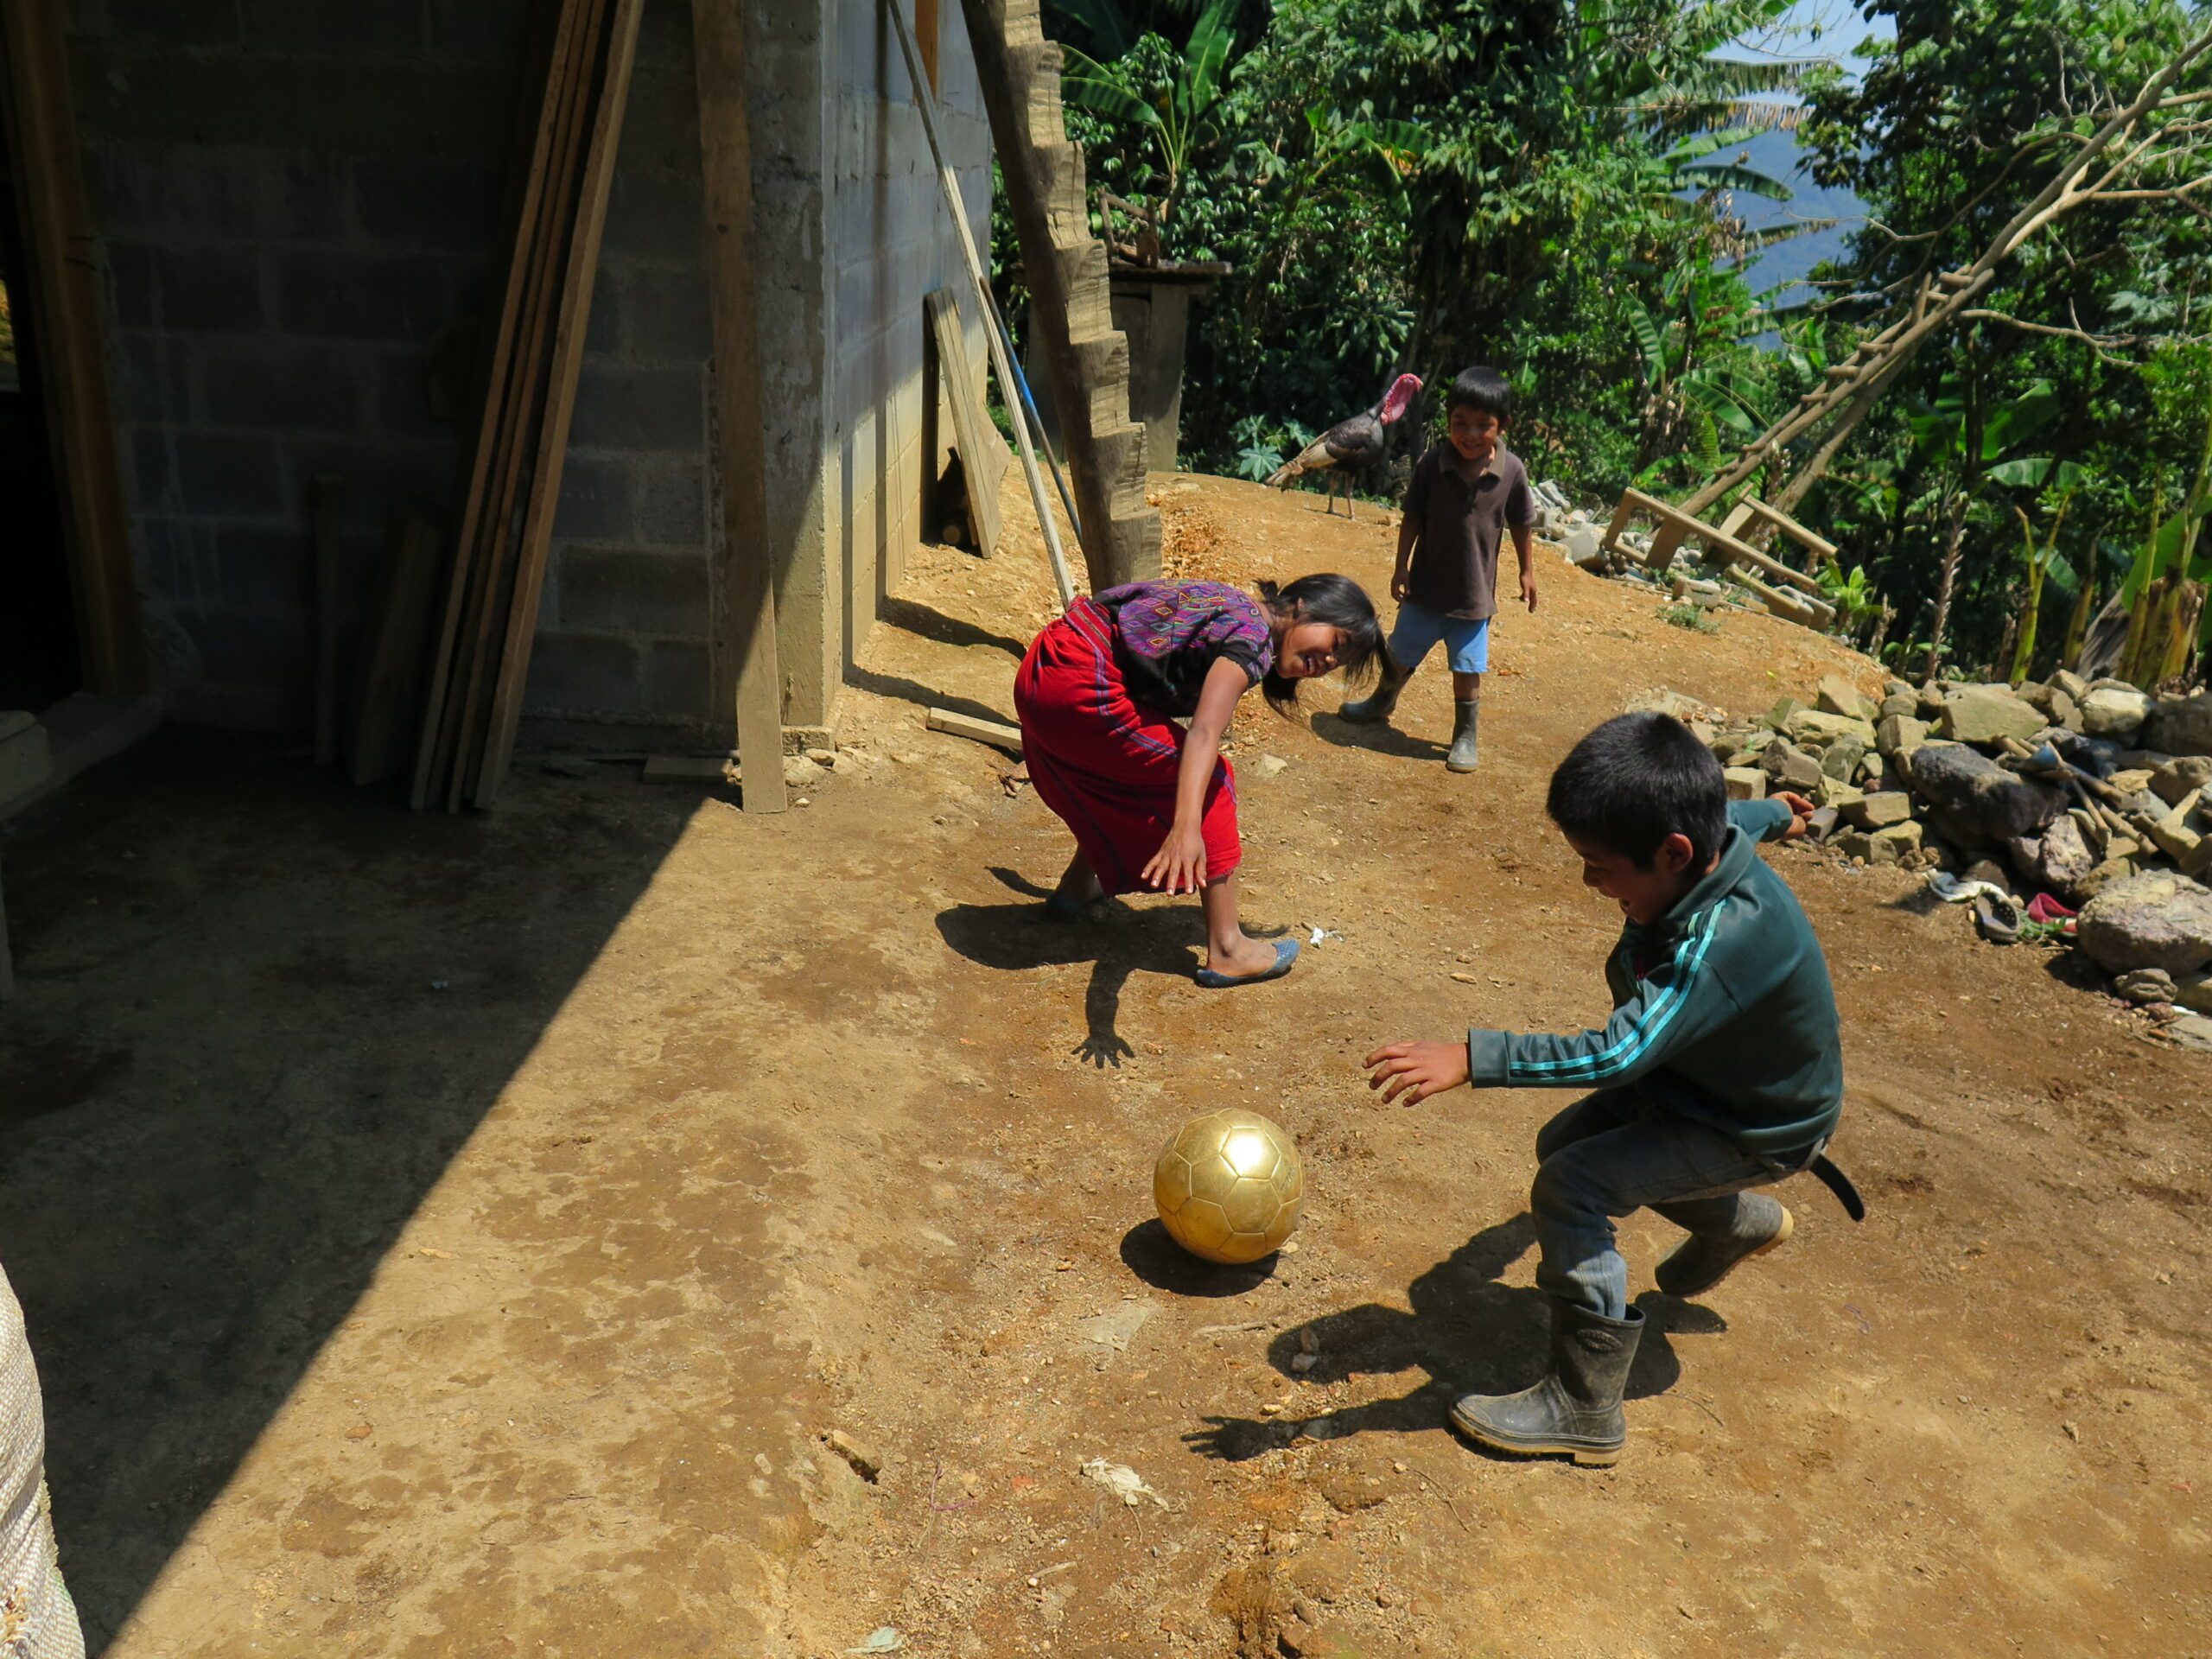 a couple of young kids kick a ball in the dirt in front of their house